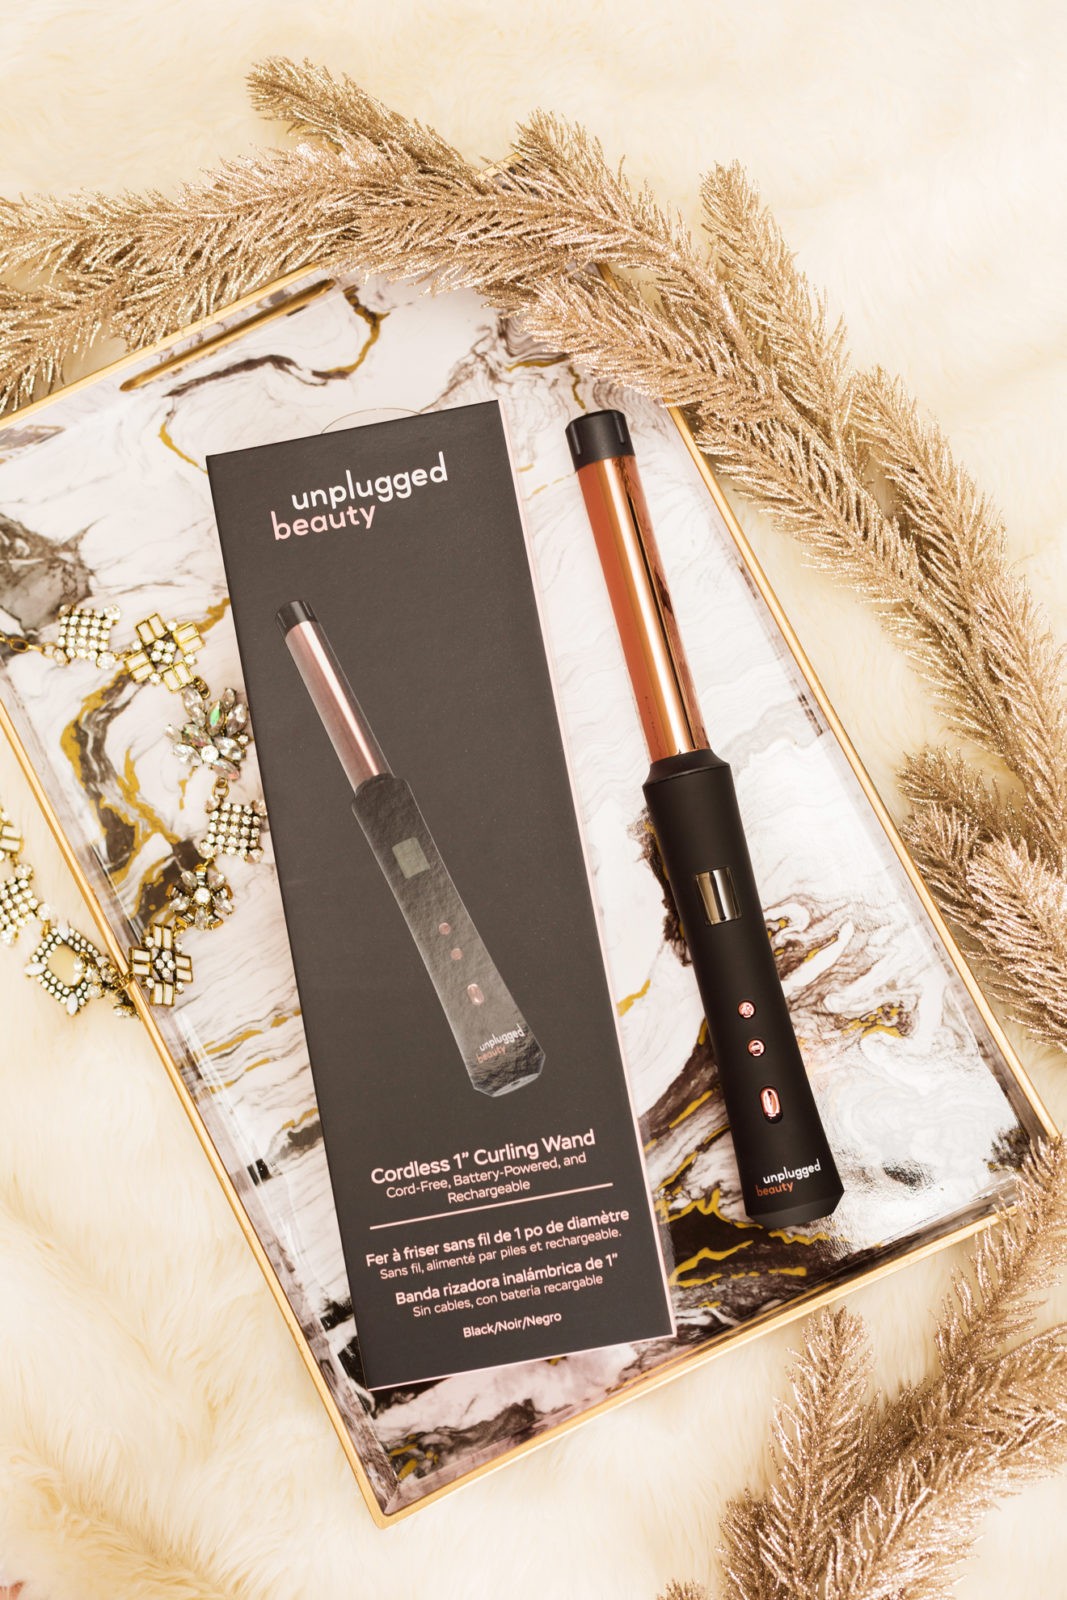 Gift Ideas for the Woman Who Has Everything by Lifestyle Blogger Laura Lily, Unplugged Beauty Cordless Curling Want, Luxurious Gift Ideas for Her |  Gift Ideas for the Woman Who Has Everything by popular Los Angeles life and style blogger, Laura Lily: image of a Unplugged Beauty cordless curling wand.